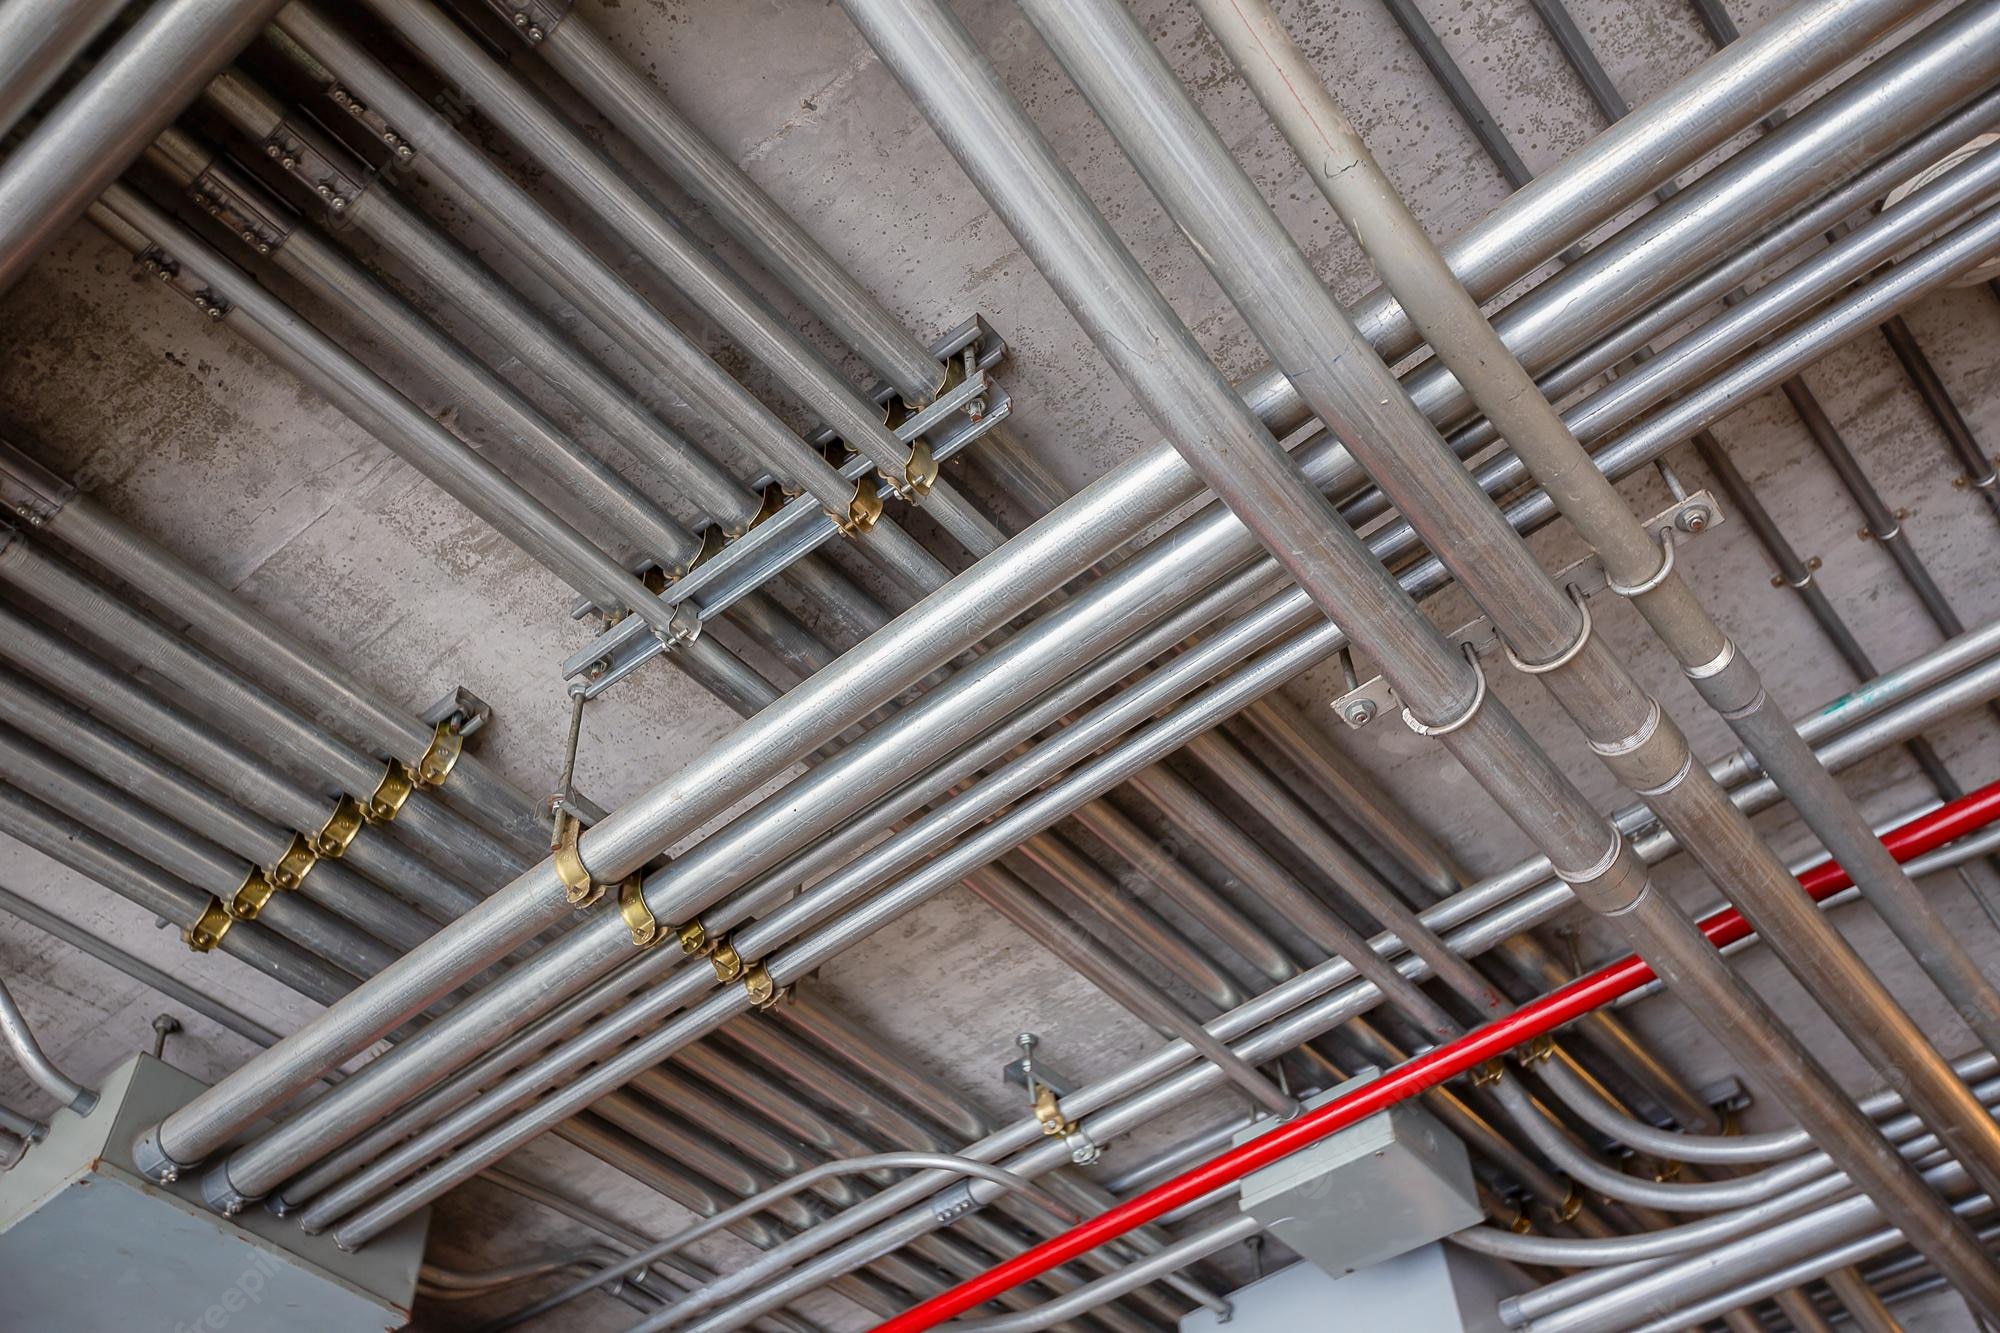 How many electrical conduit types do you know?